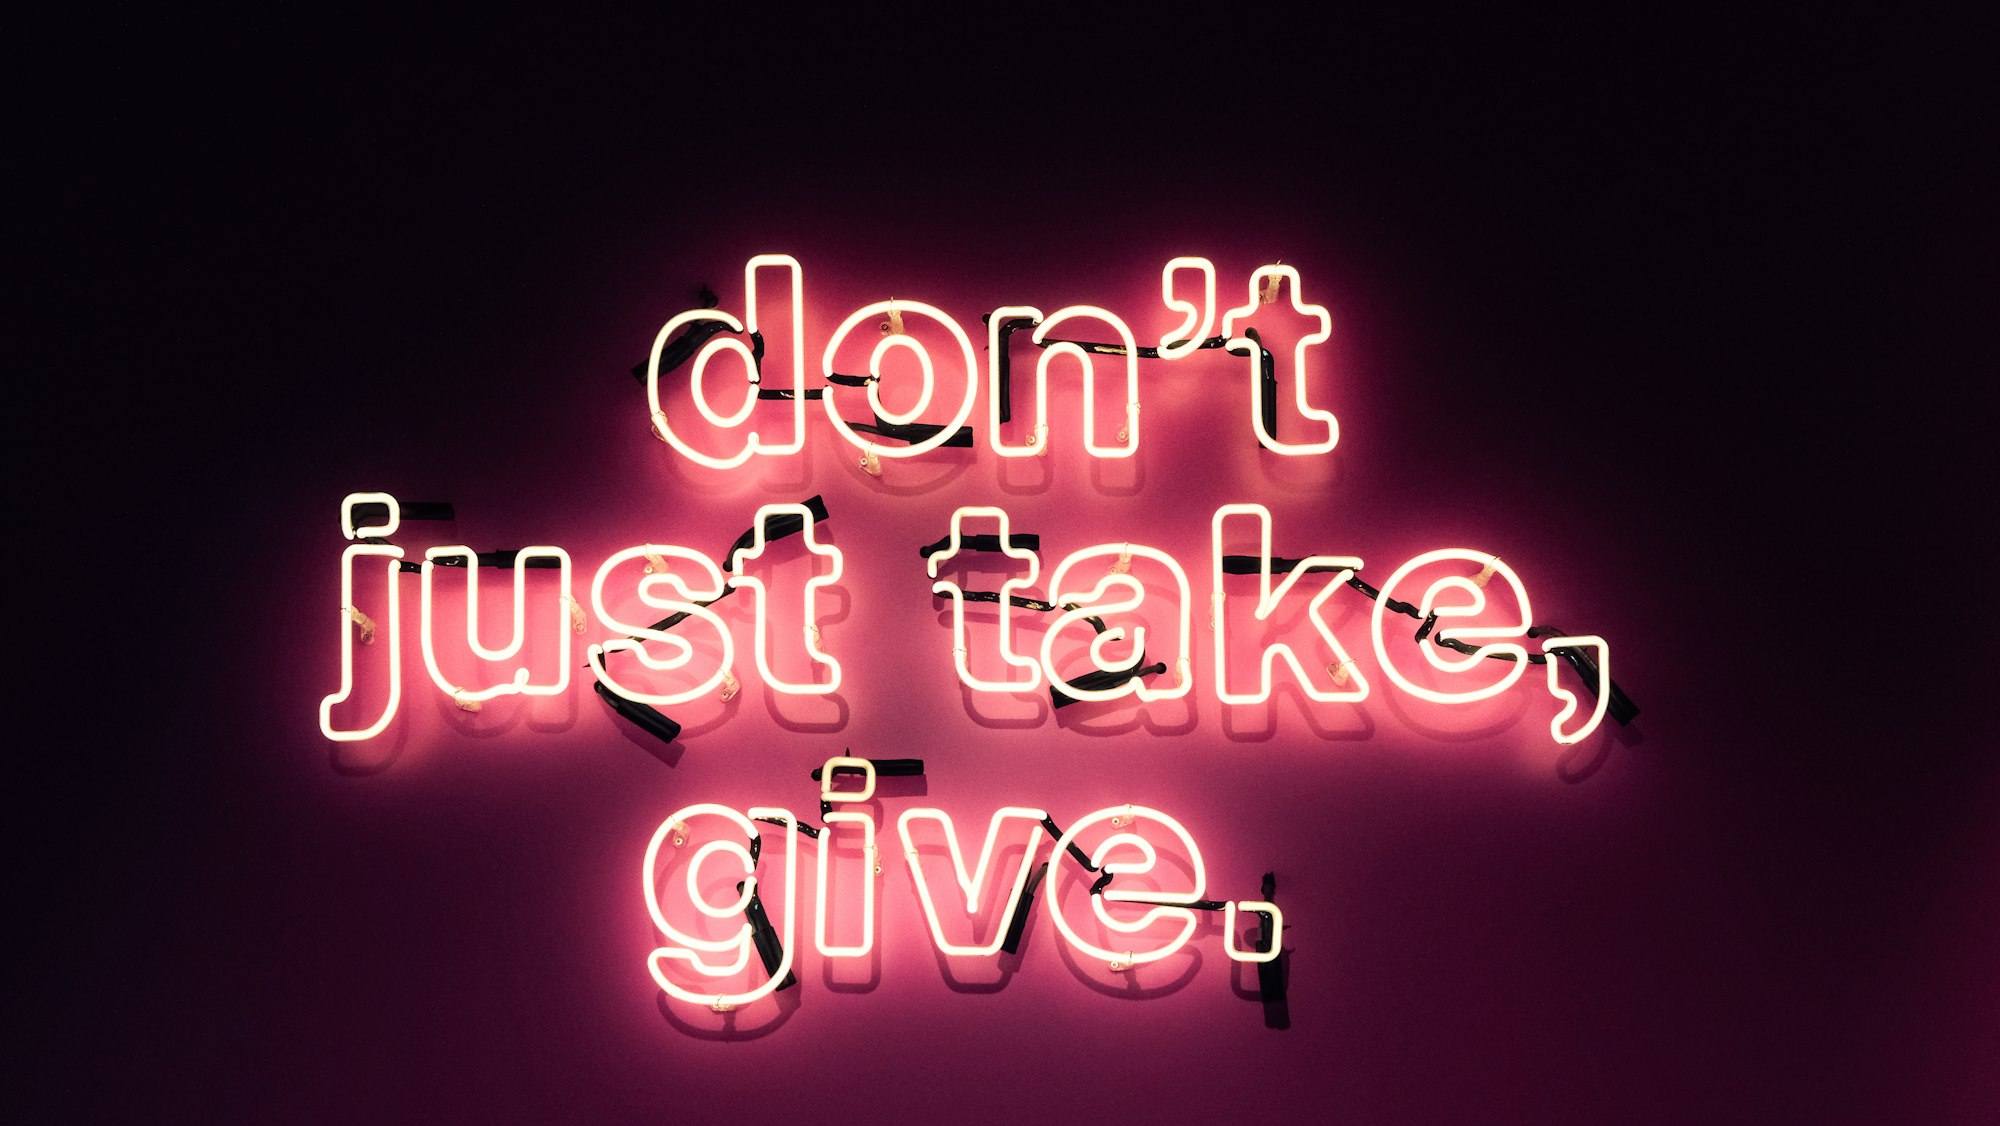 Don't just take, give.